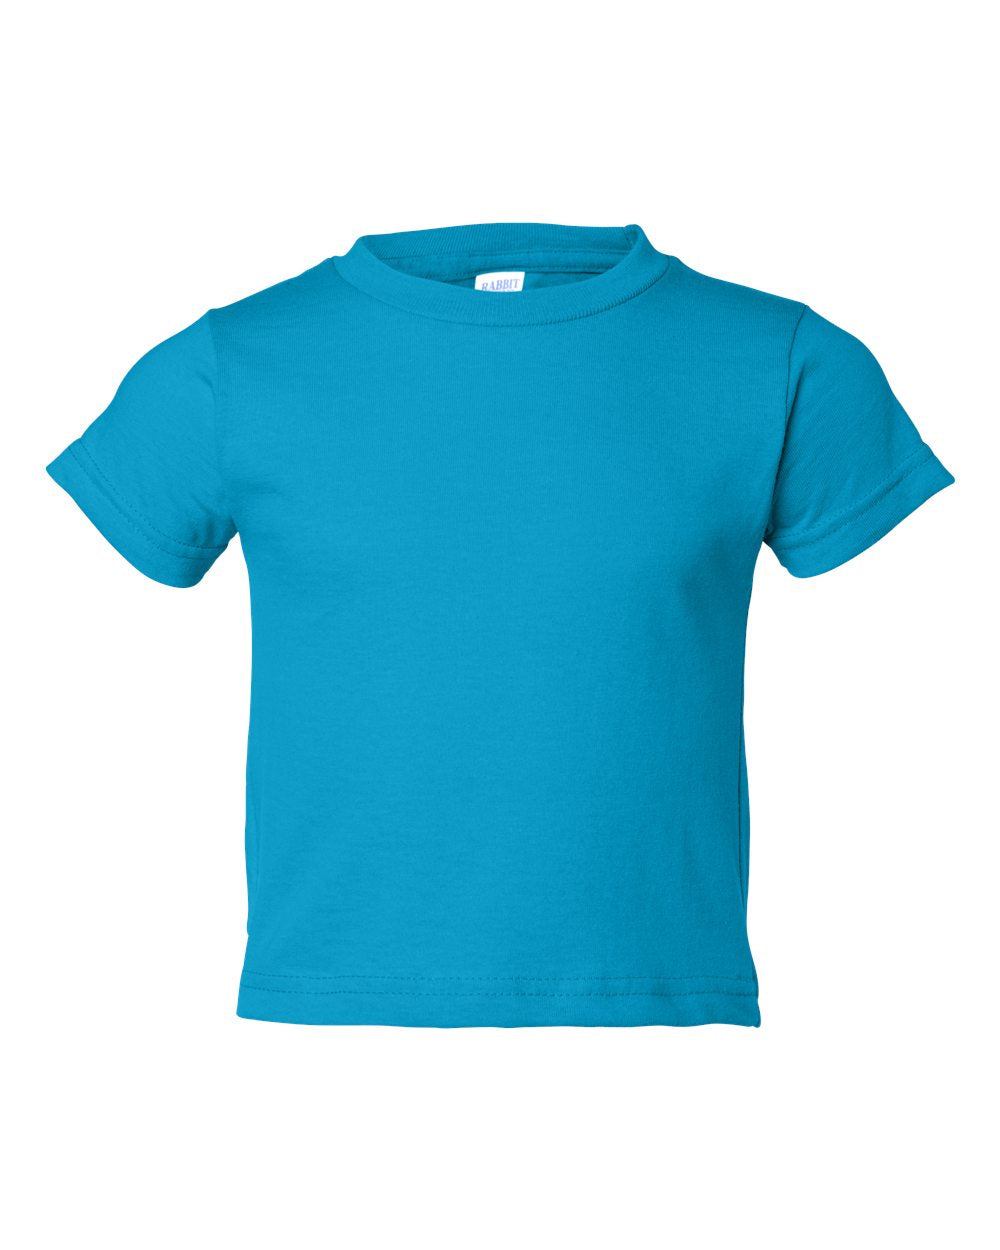 Toddler Jersey T-shirt, 100% Cotton, Turquoise